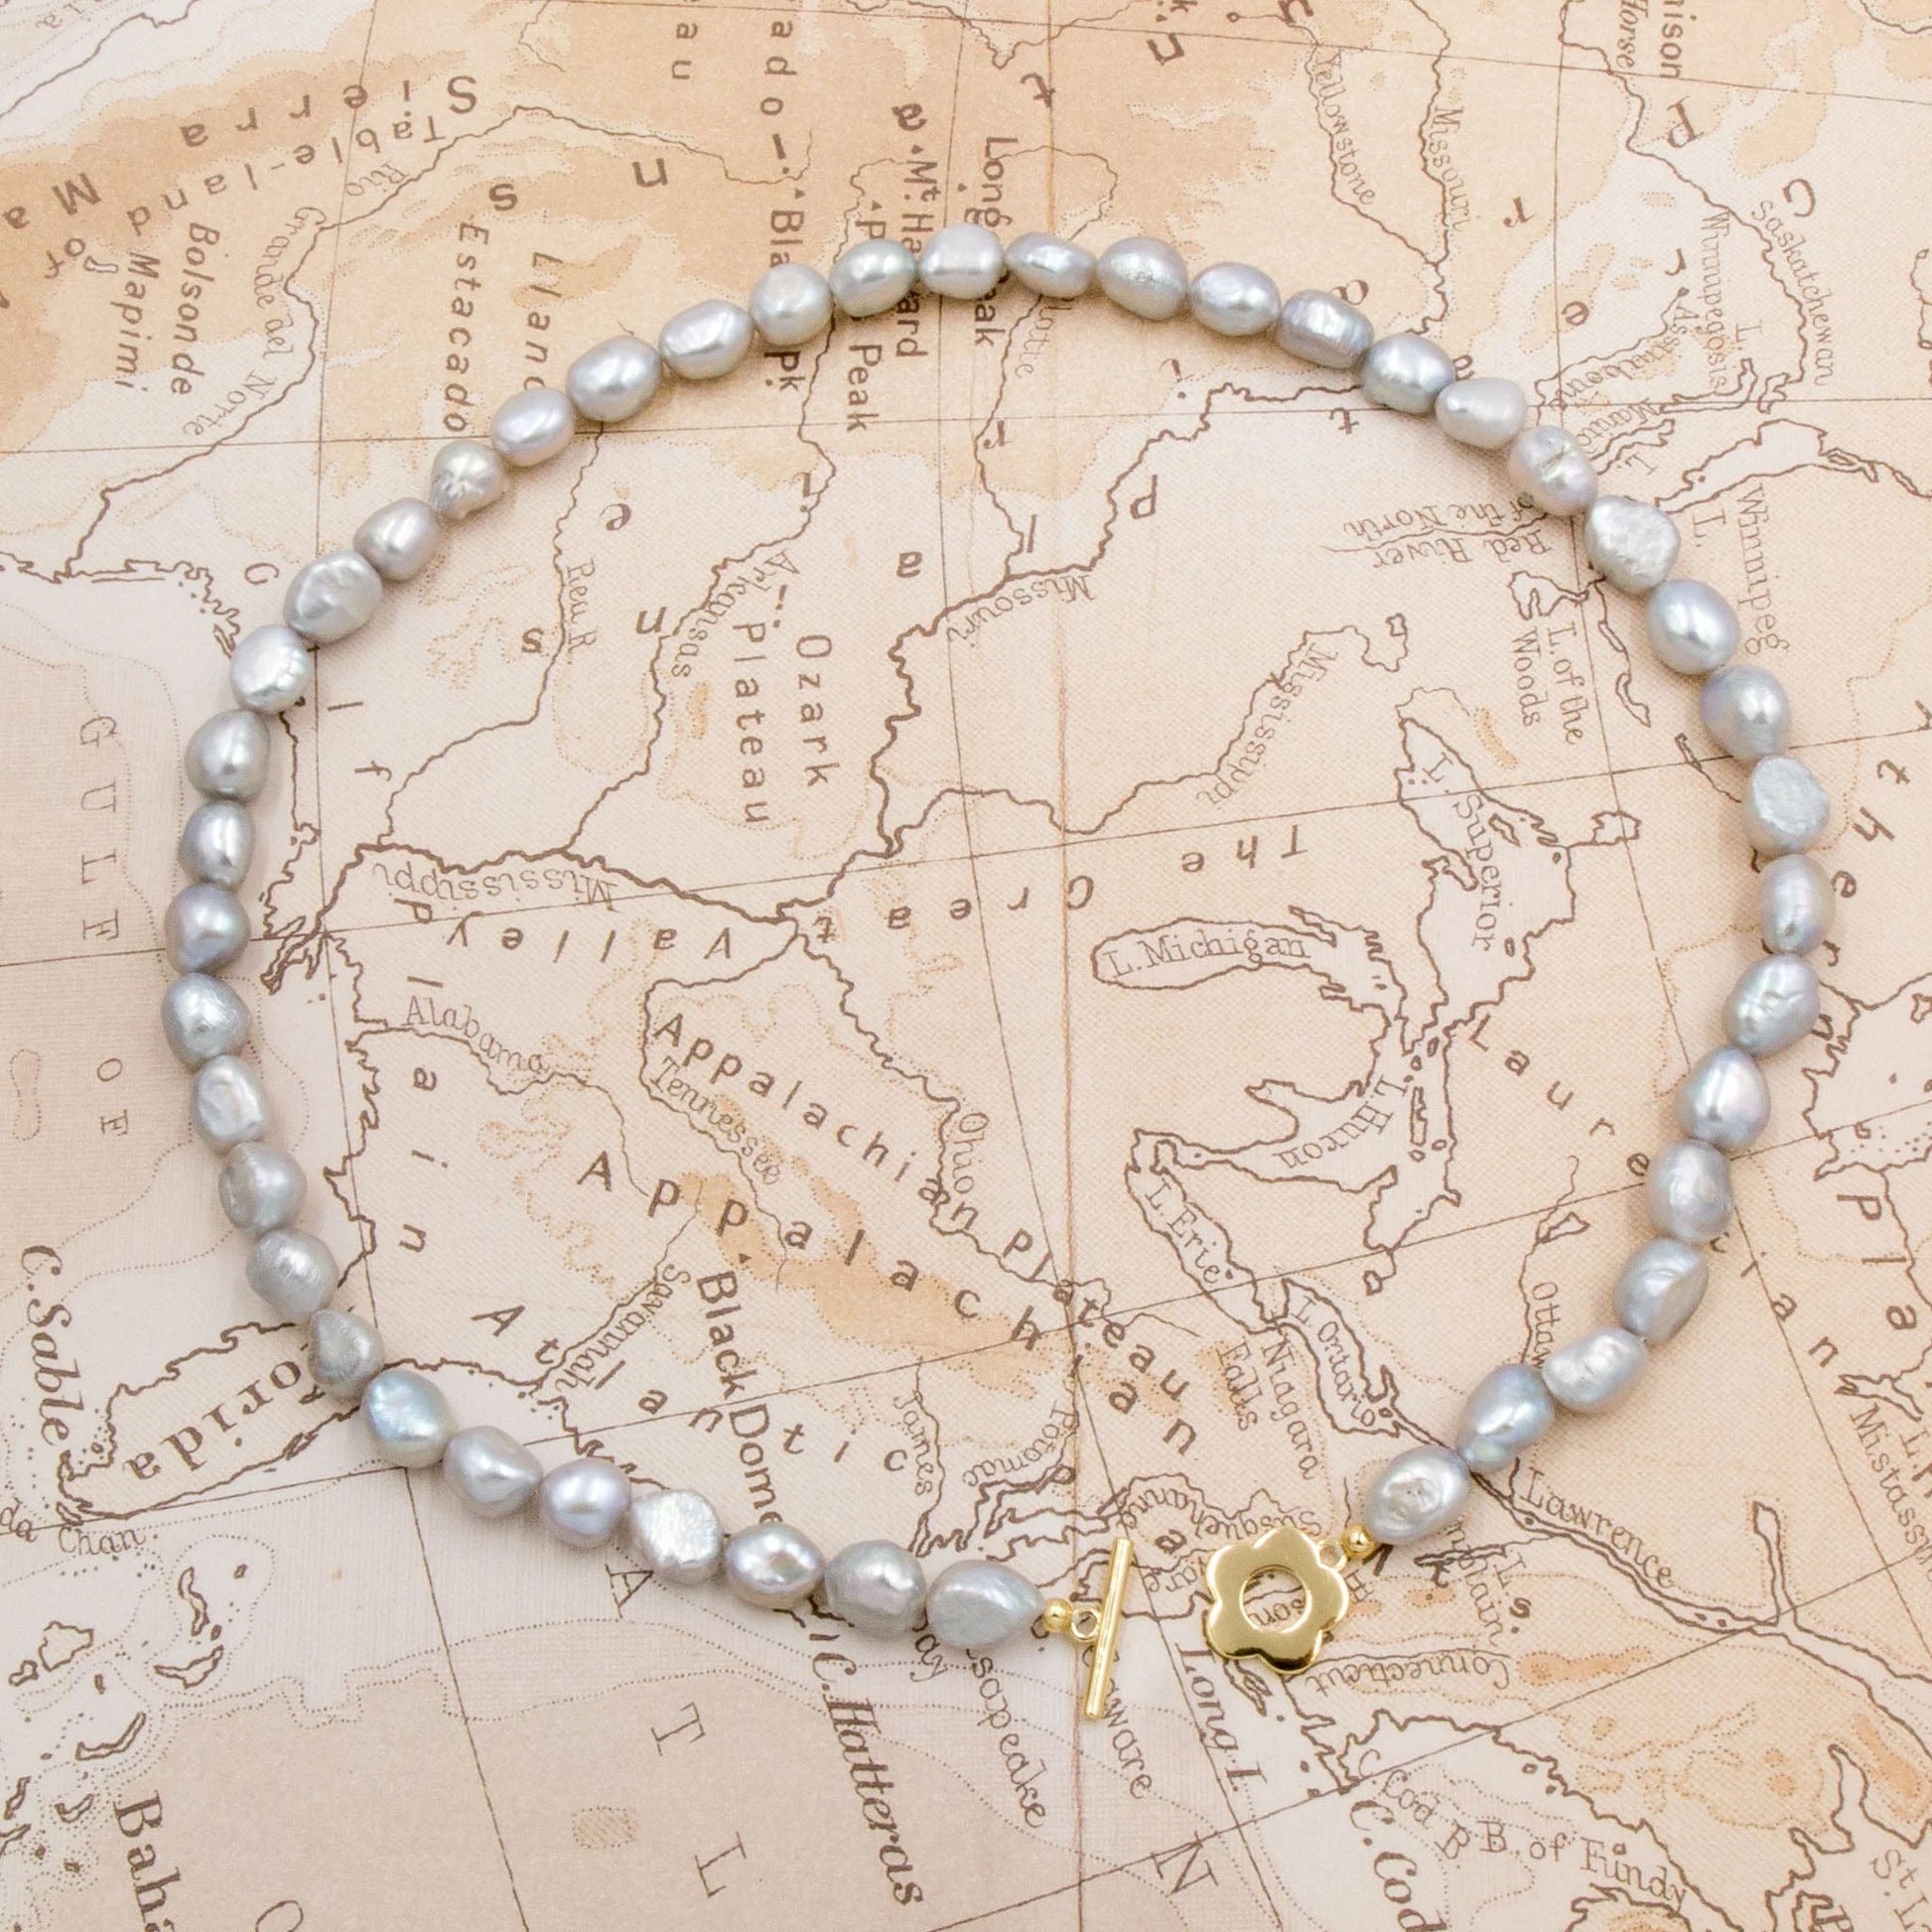 Arbor Trading Post Necklaces Handcrafted Freshwater Silver Baroque Pearl Strand Necklace, 8-11mm Pearls